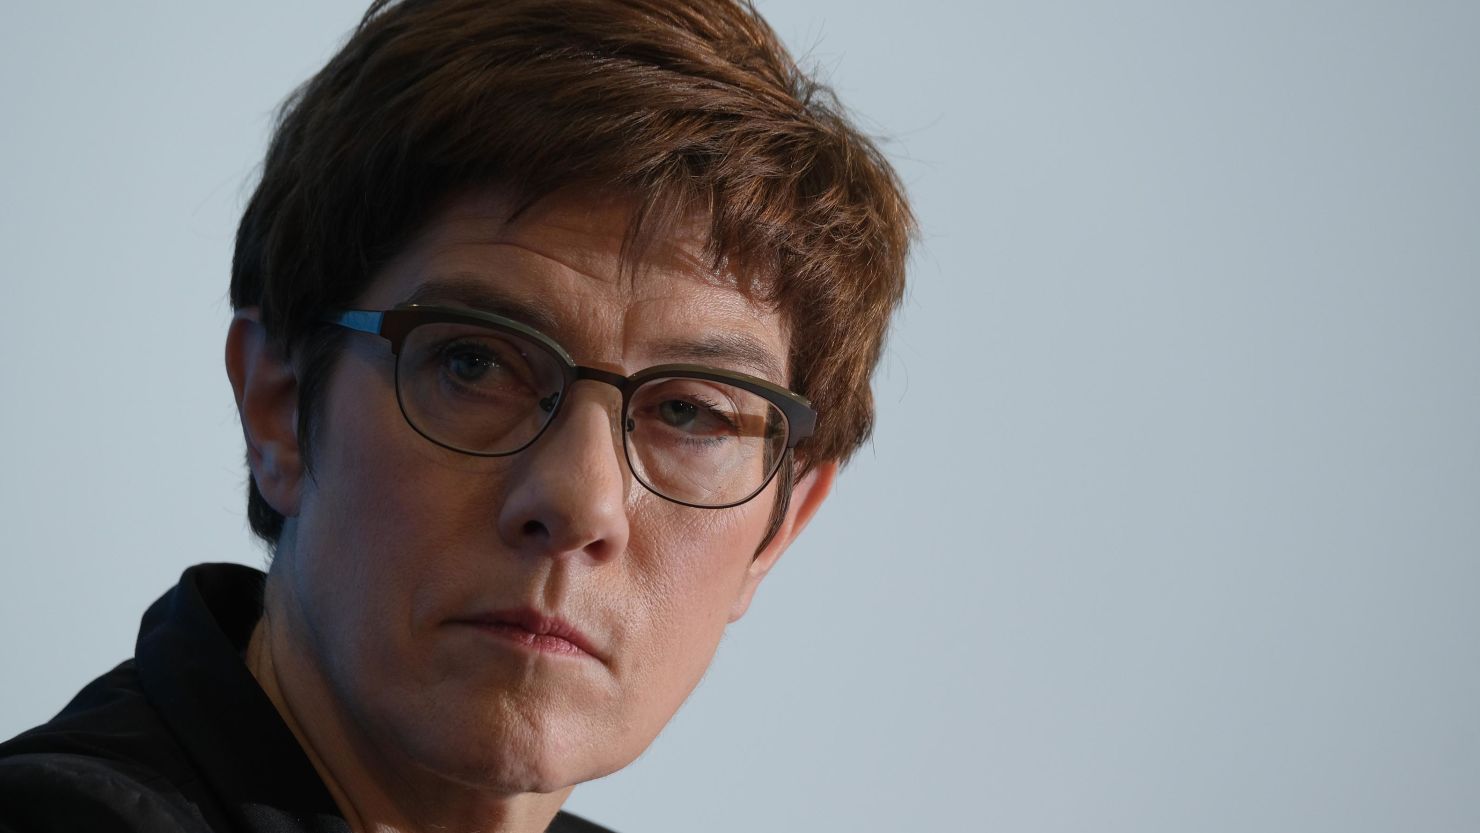 Annegret Kramp-Karrenbauer speaks to the media the day after state elections in Thuringia on October 28, 2019.